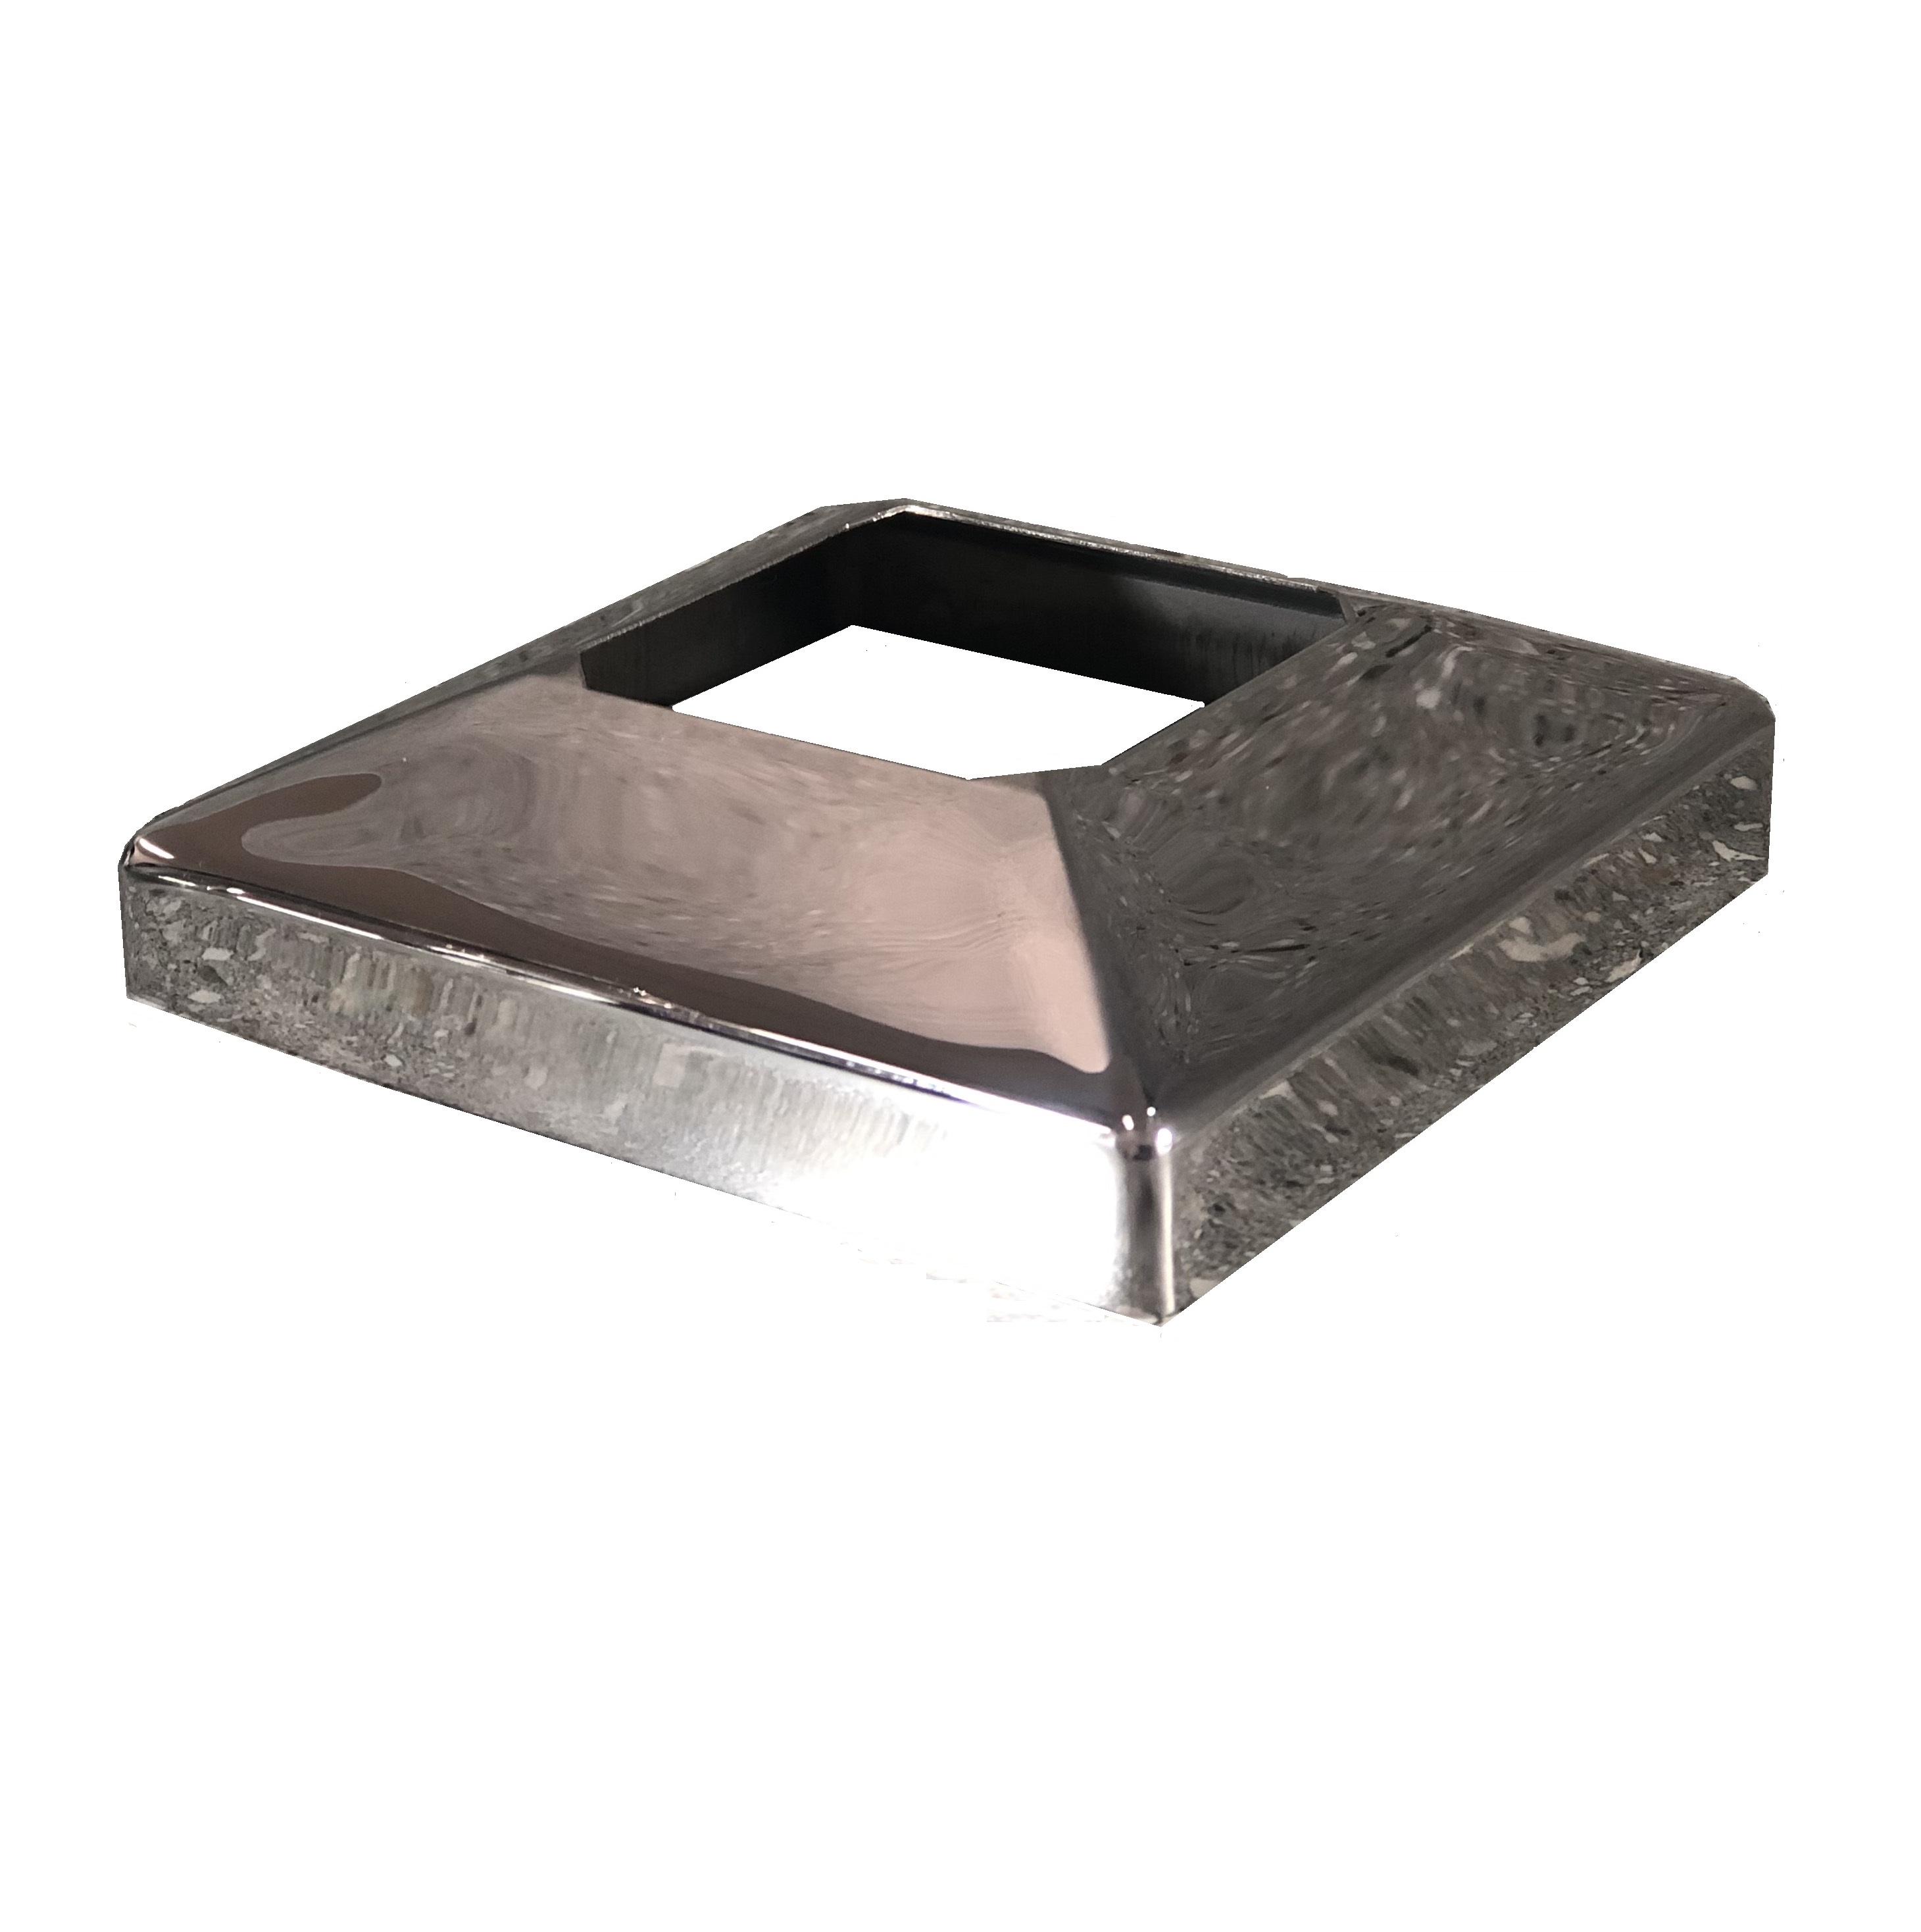 Duplex 2205 Stainless Steel 50mm Base Plate Cover - Polished